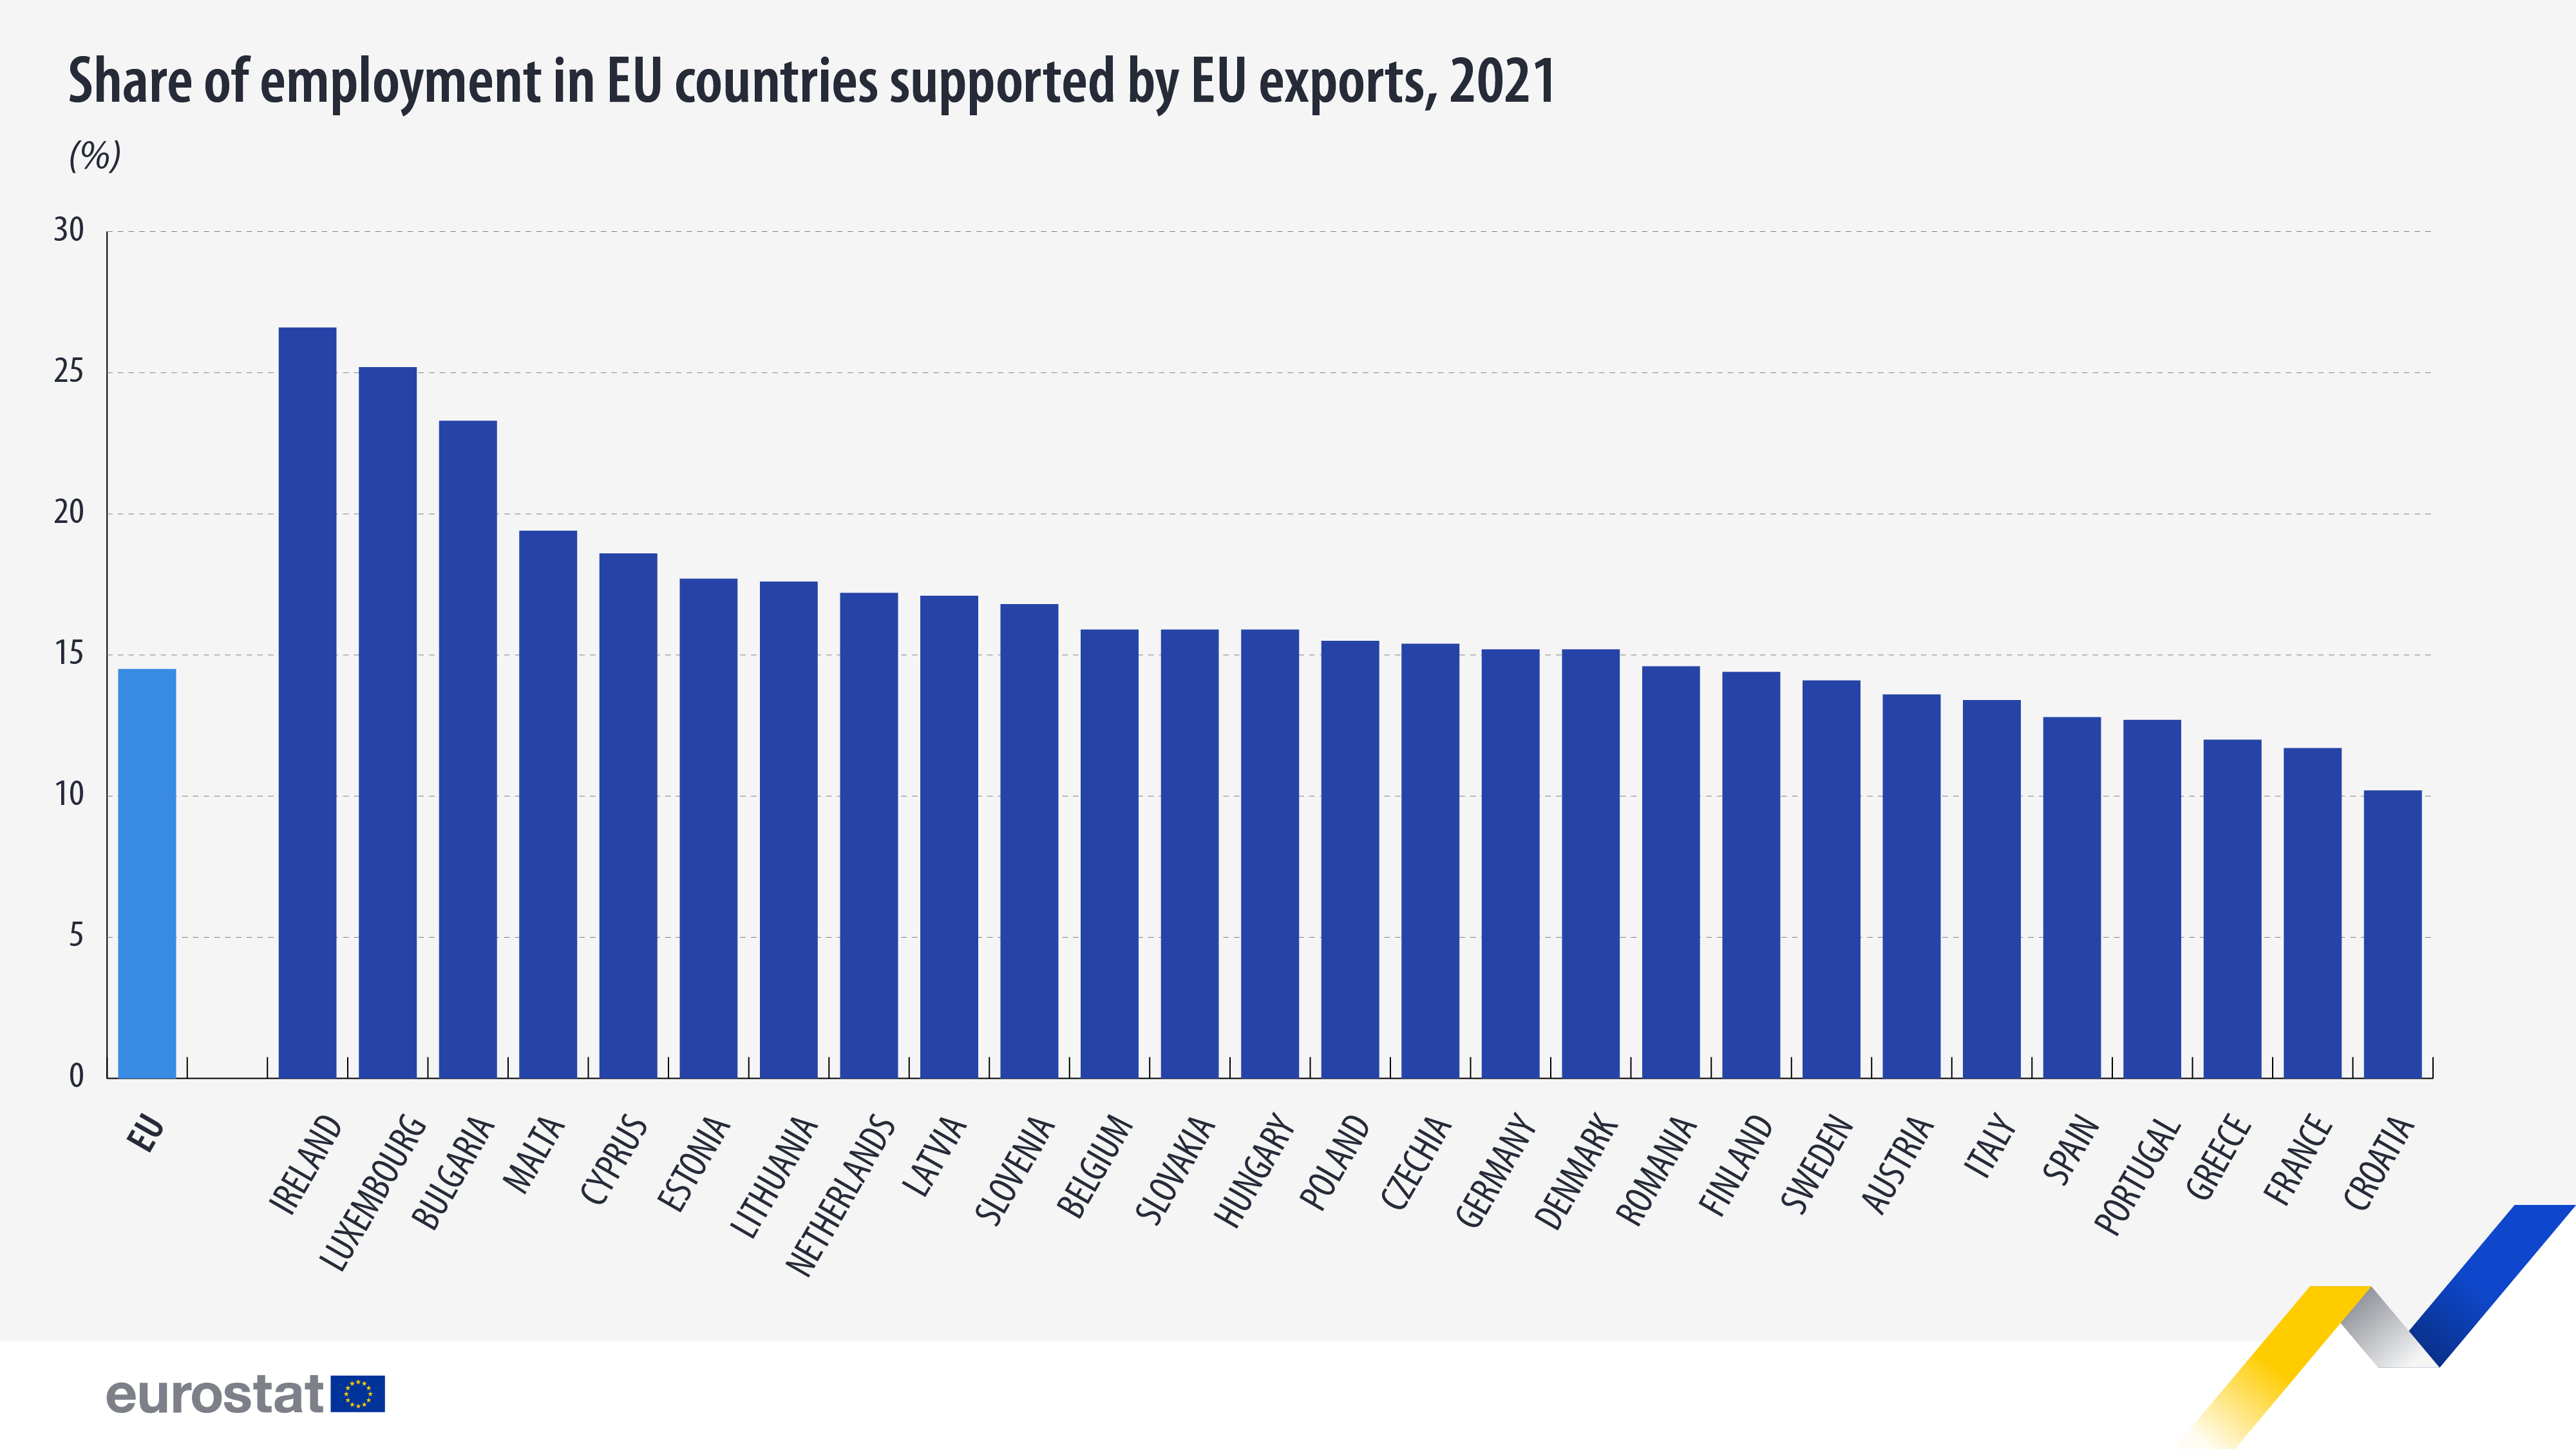 share employment supported by eu exports 2021